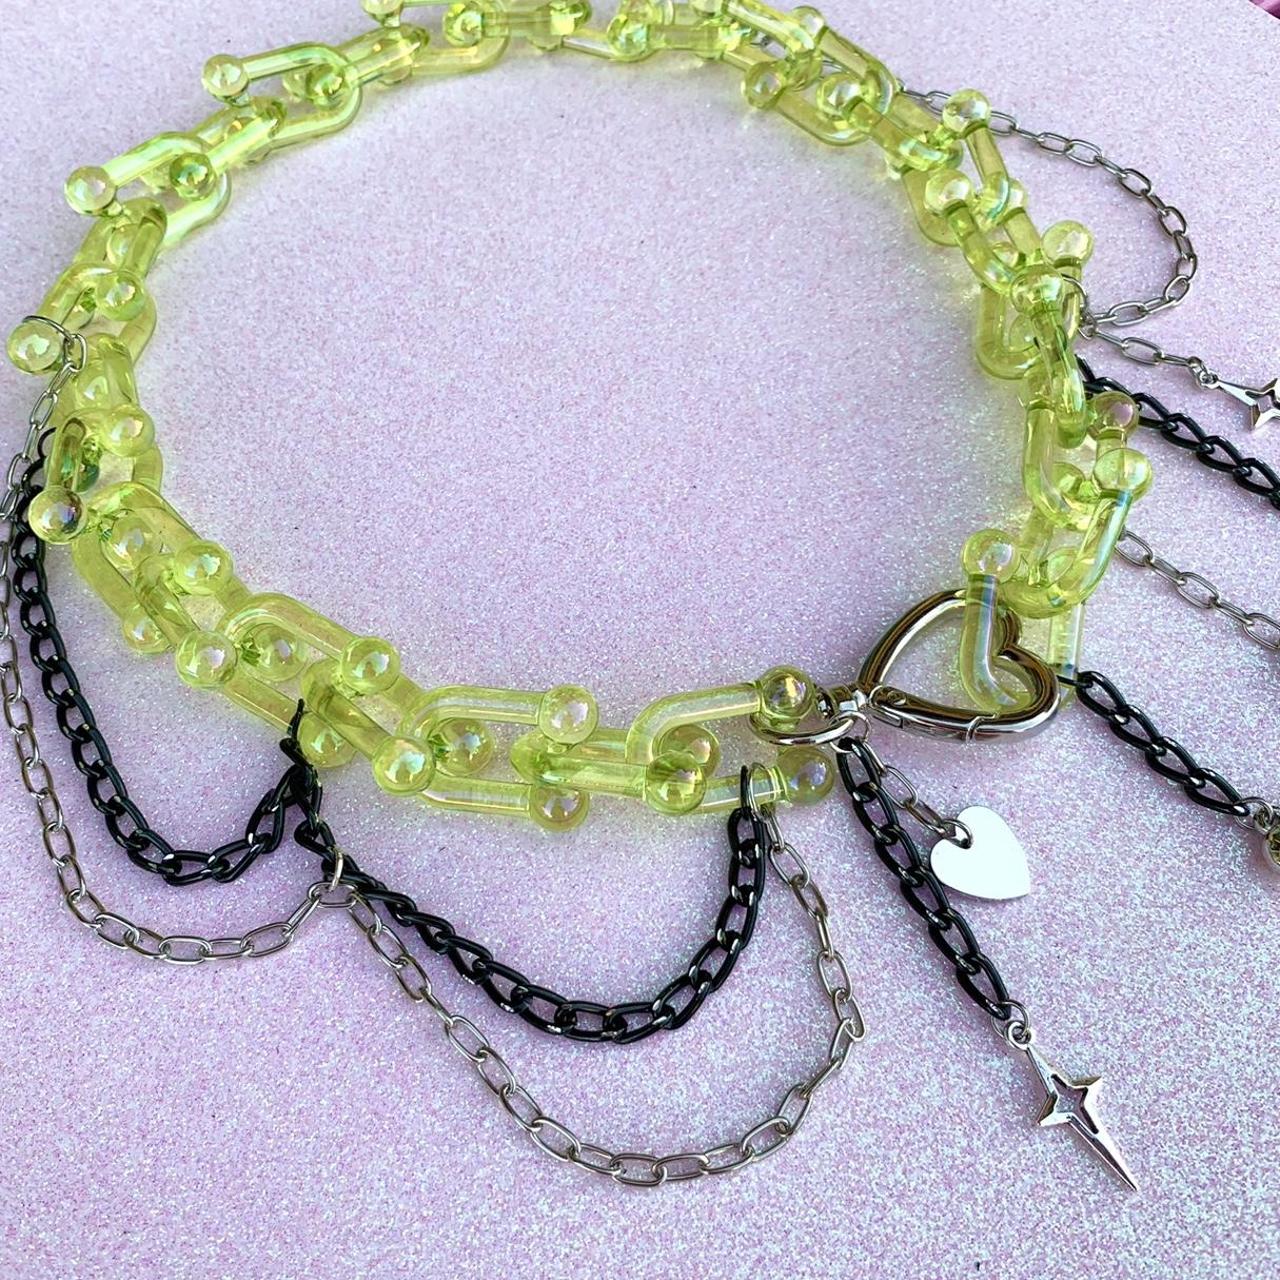 Product Image 2 - Handmade choker necklace made by